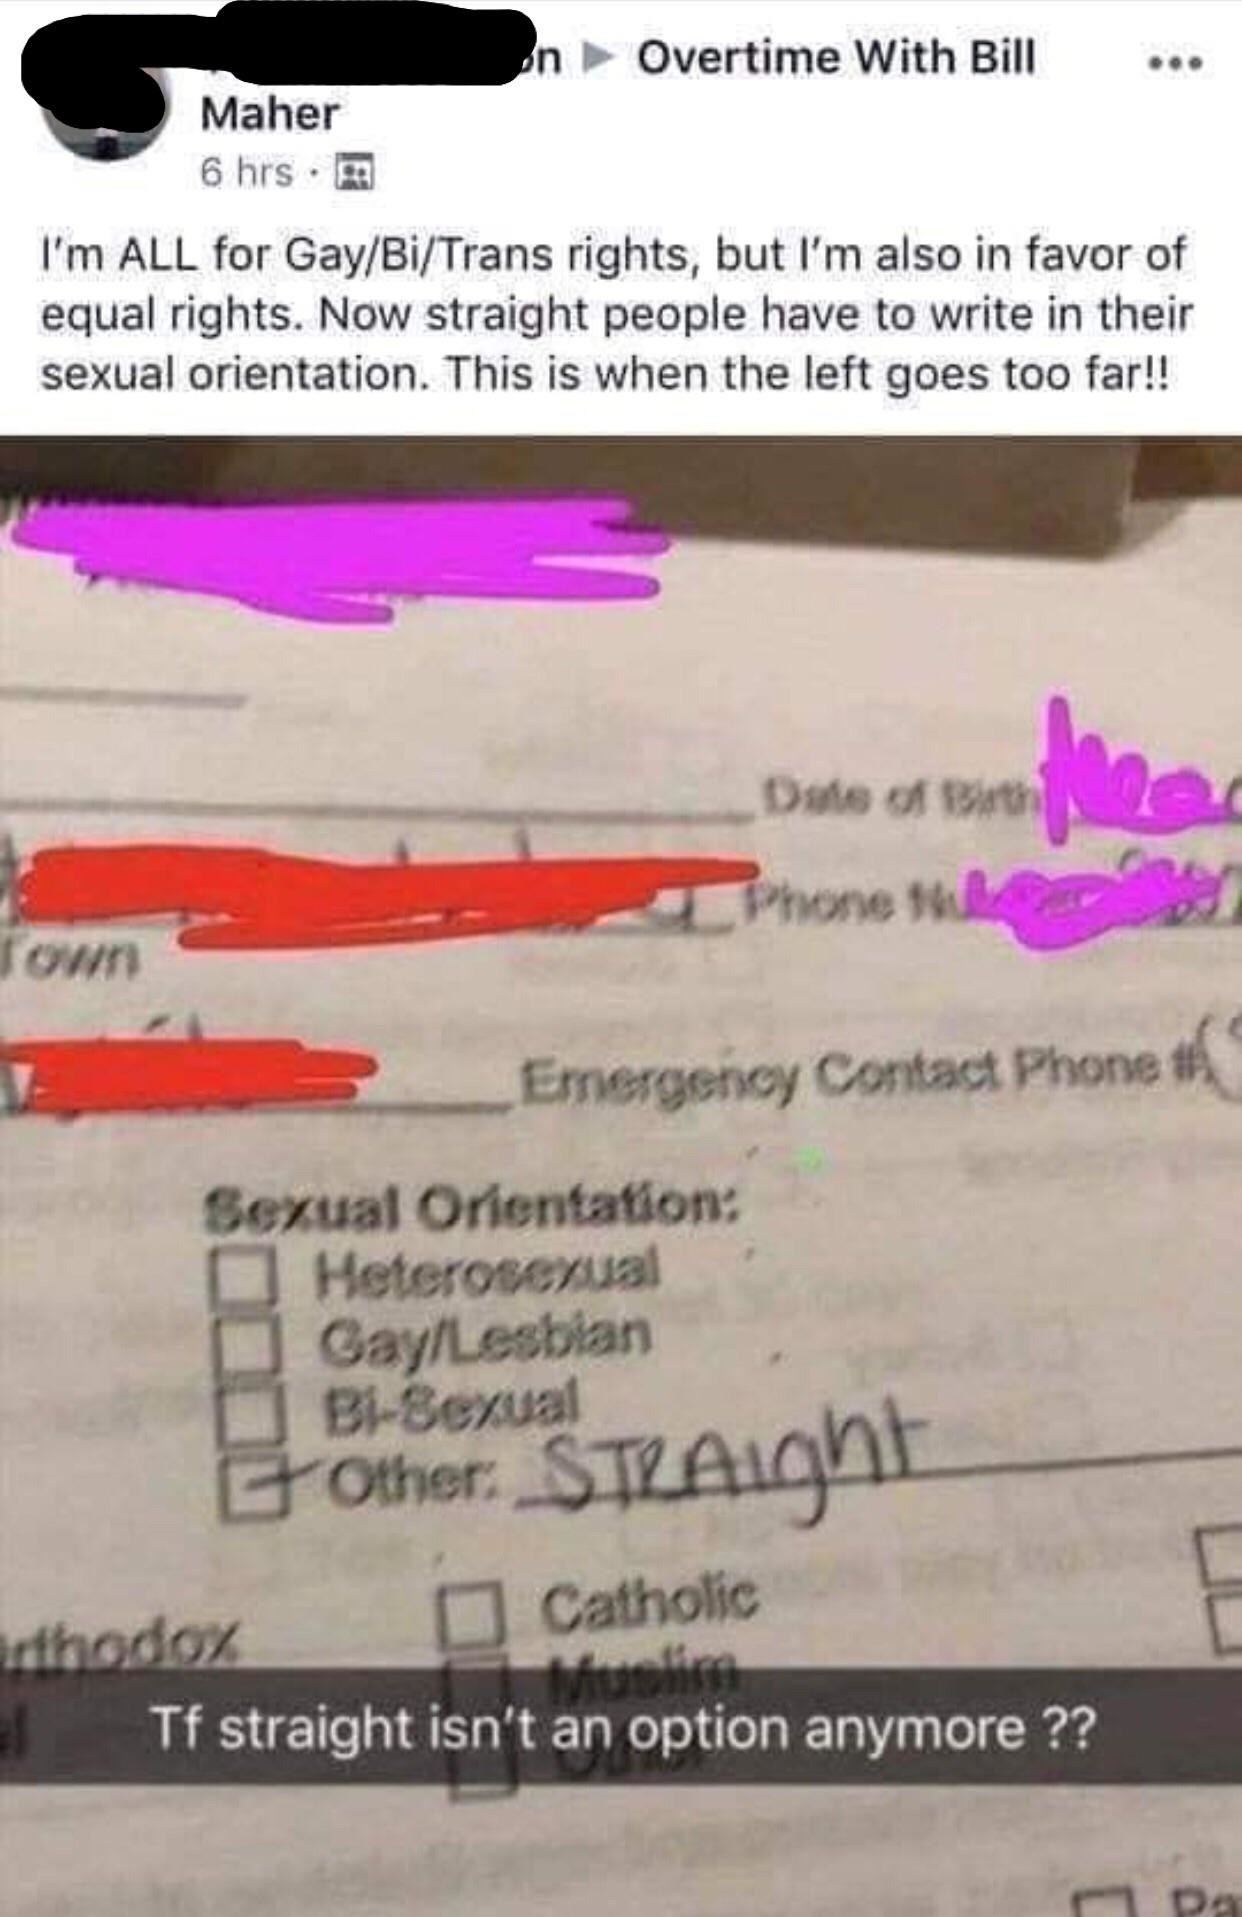 facebook post of someone posting a form asking sexual orientation and they&#x27;re mad straight isn&#x27;t an option but it says heterosexual